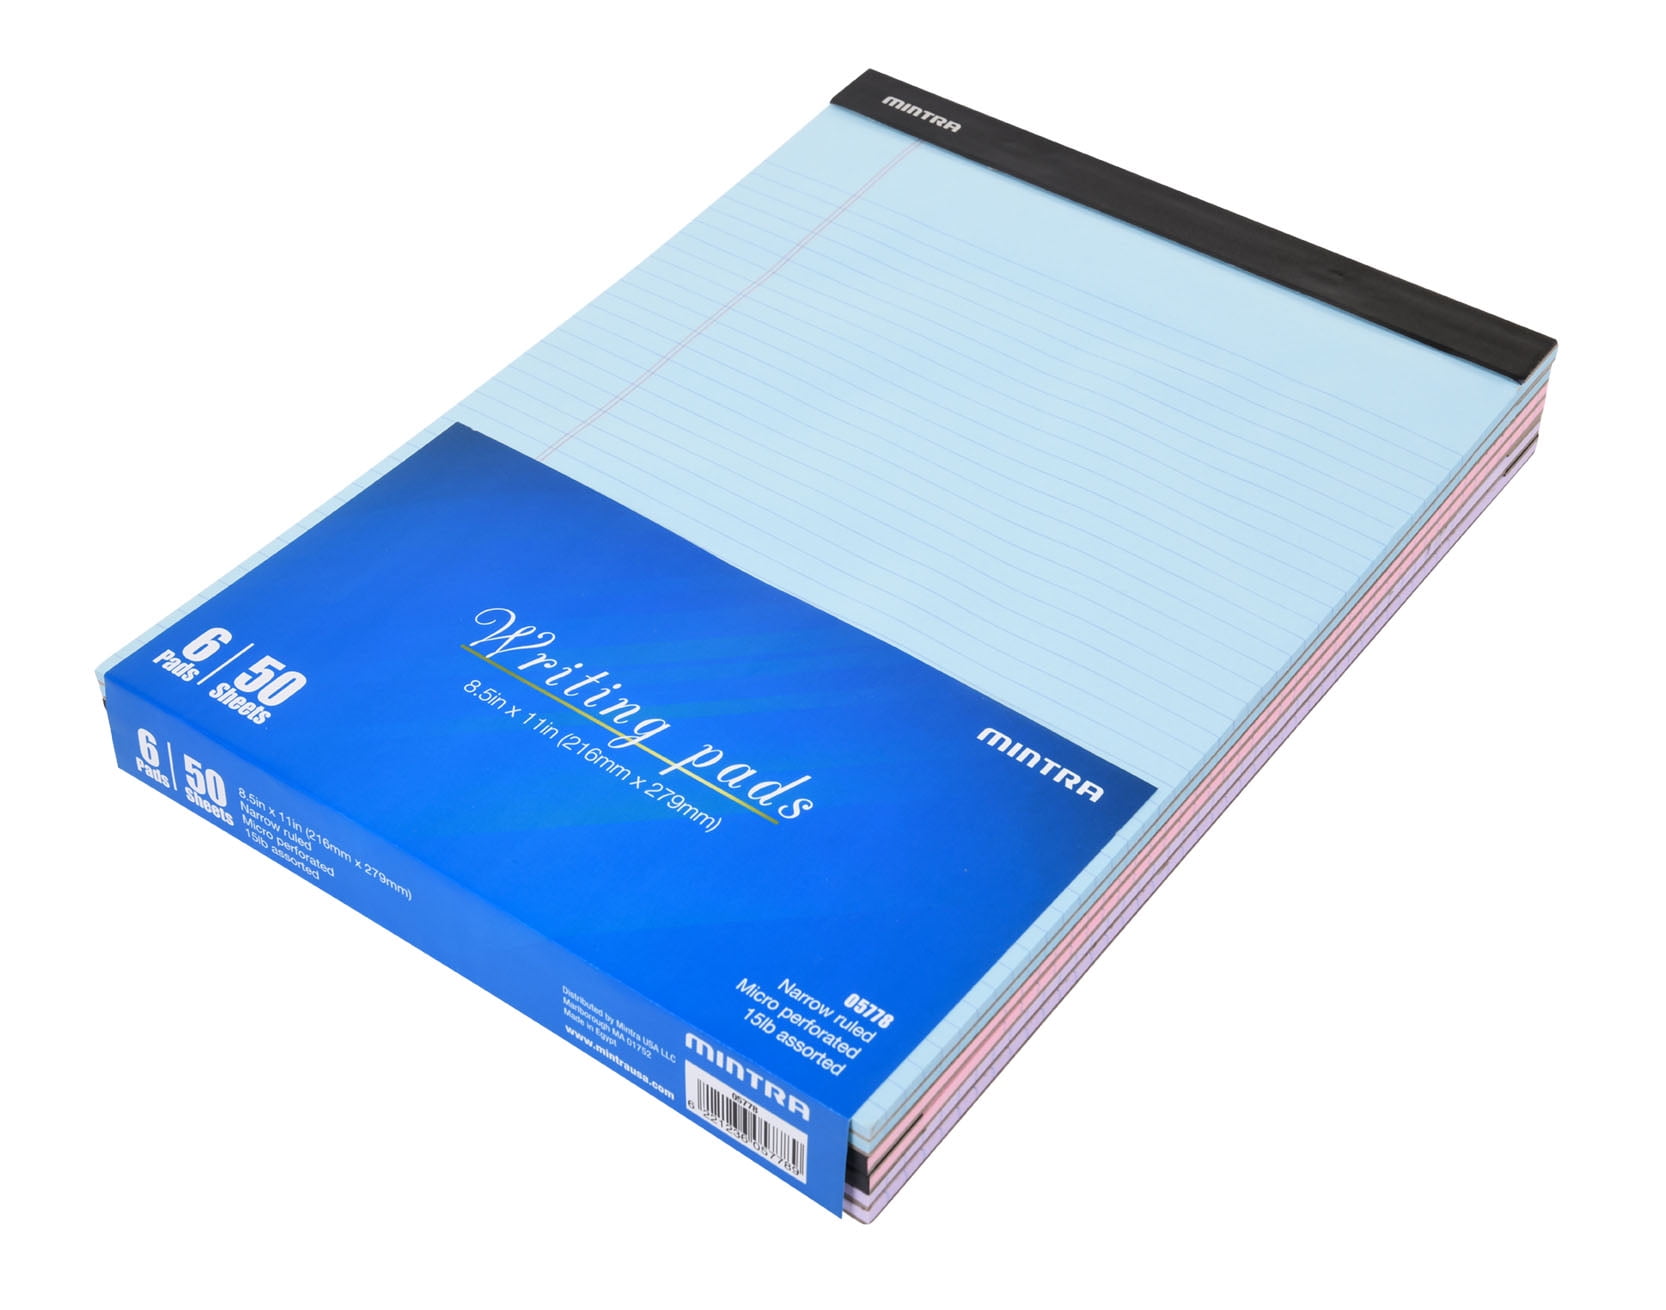 Notebook Paper for School DOUBLE PAD 2PK, CANARY, 8.5in x 11in, NARROW RULED - 100 Sheets per Notepad College Mintra Office Legal Pads - Micro perforated Writing Pad Office Professional 